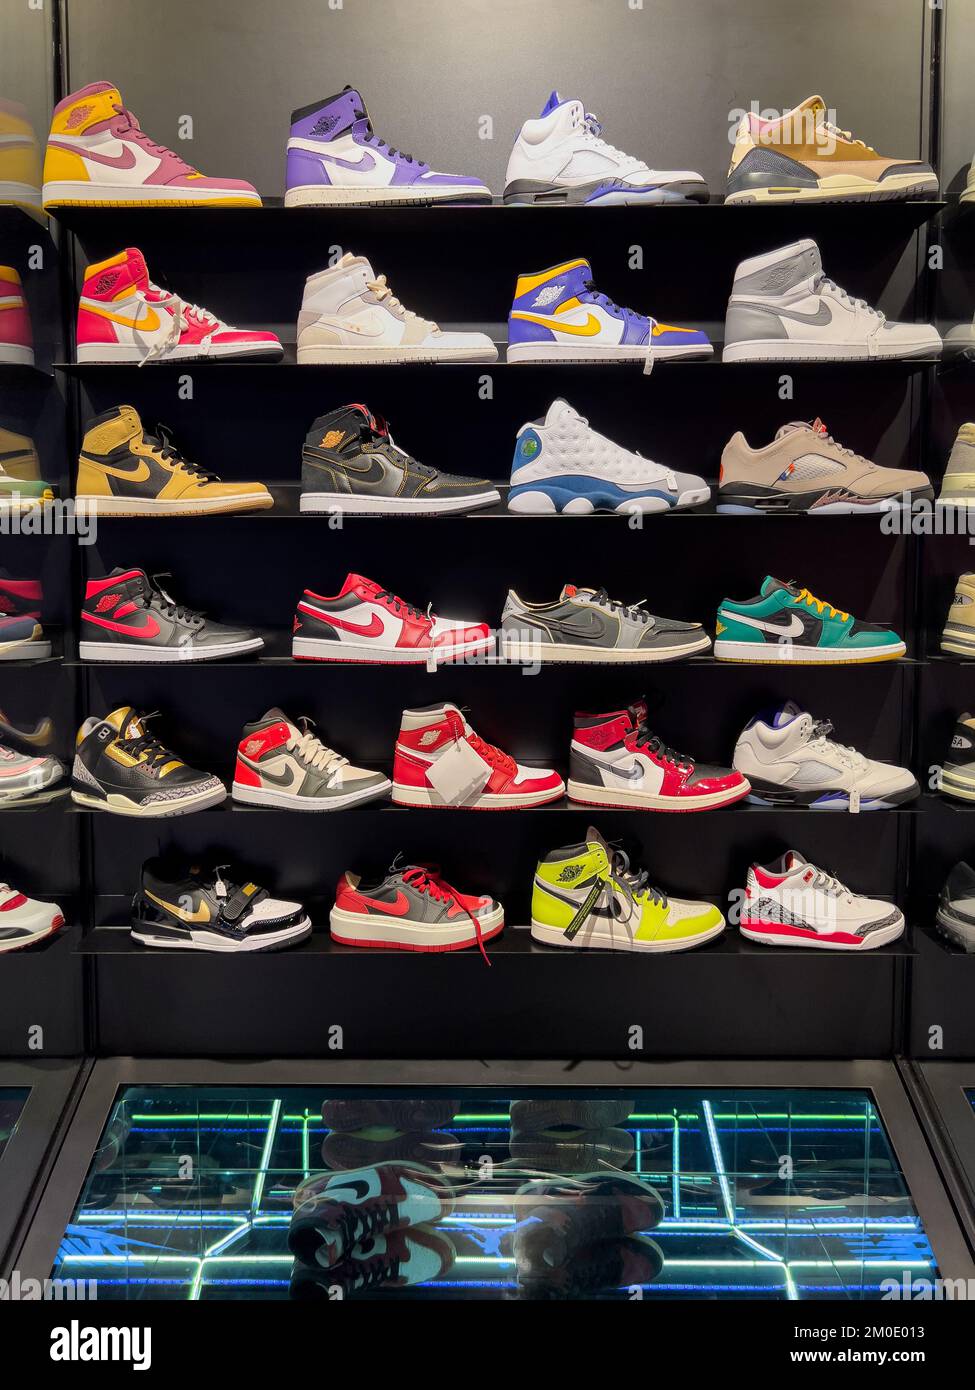 Nike footwear such as Air Jordan 1, Jordan 1 Low on shelf display for customers to select the colours they like. Stock Photo